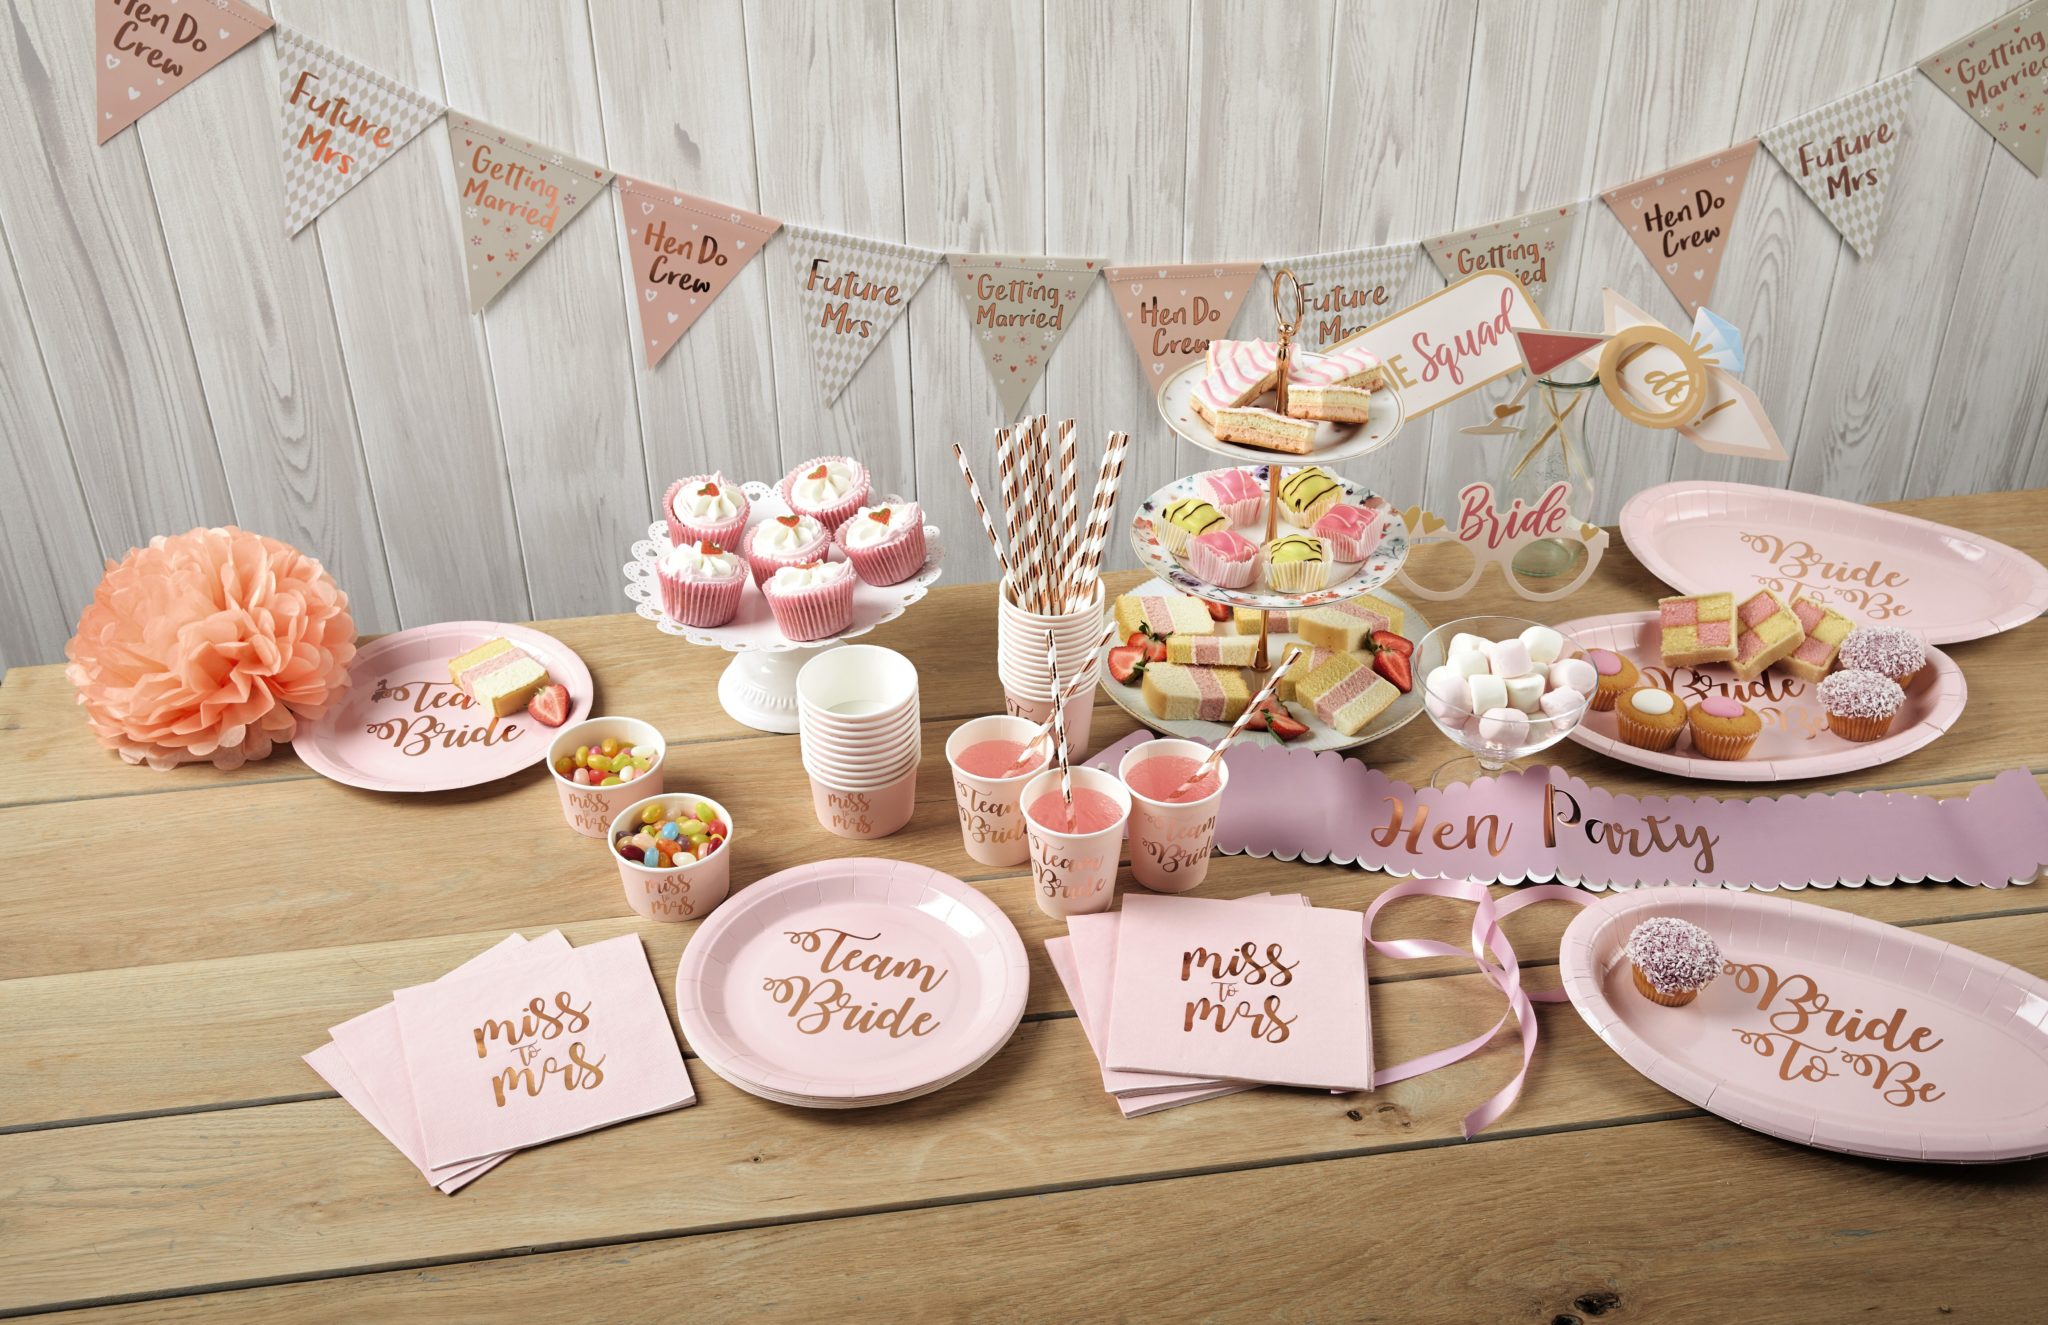  Hen  Party  Baby Shower Decorations  Coming To Aldi www 